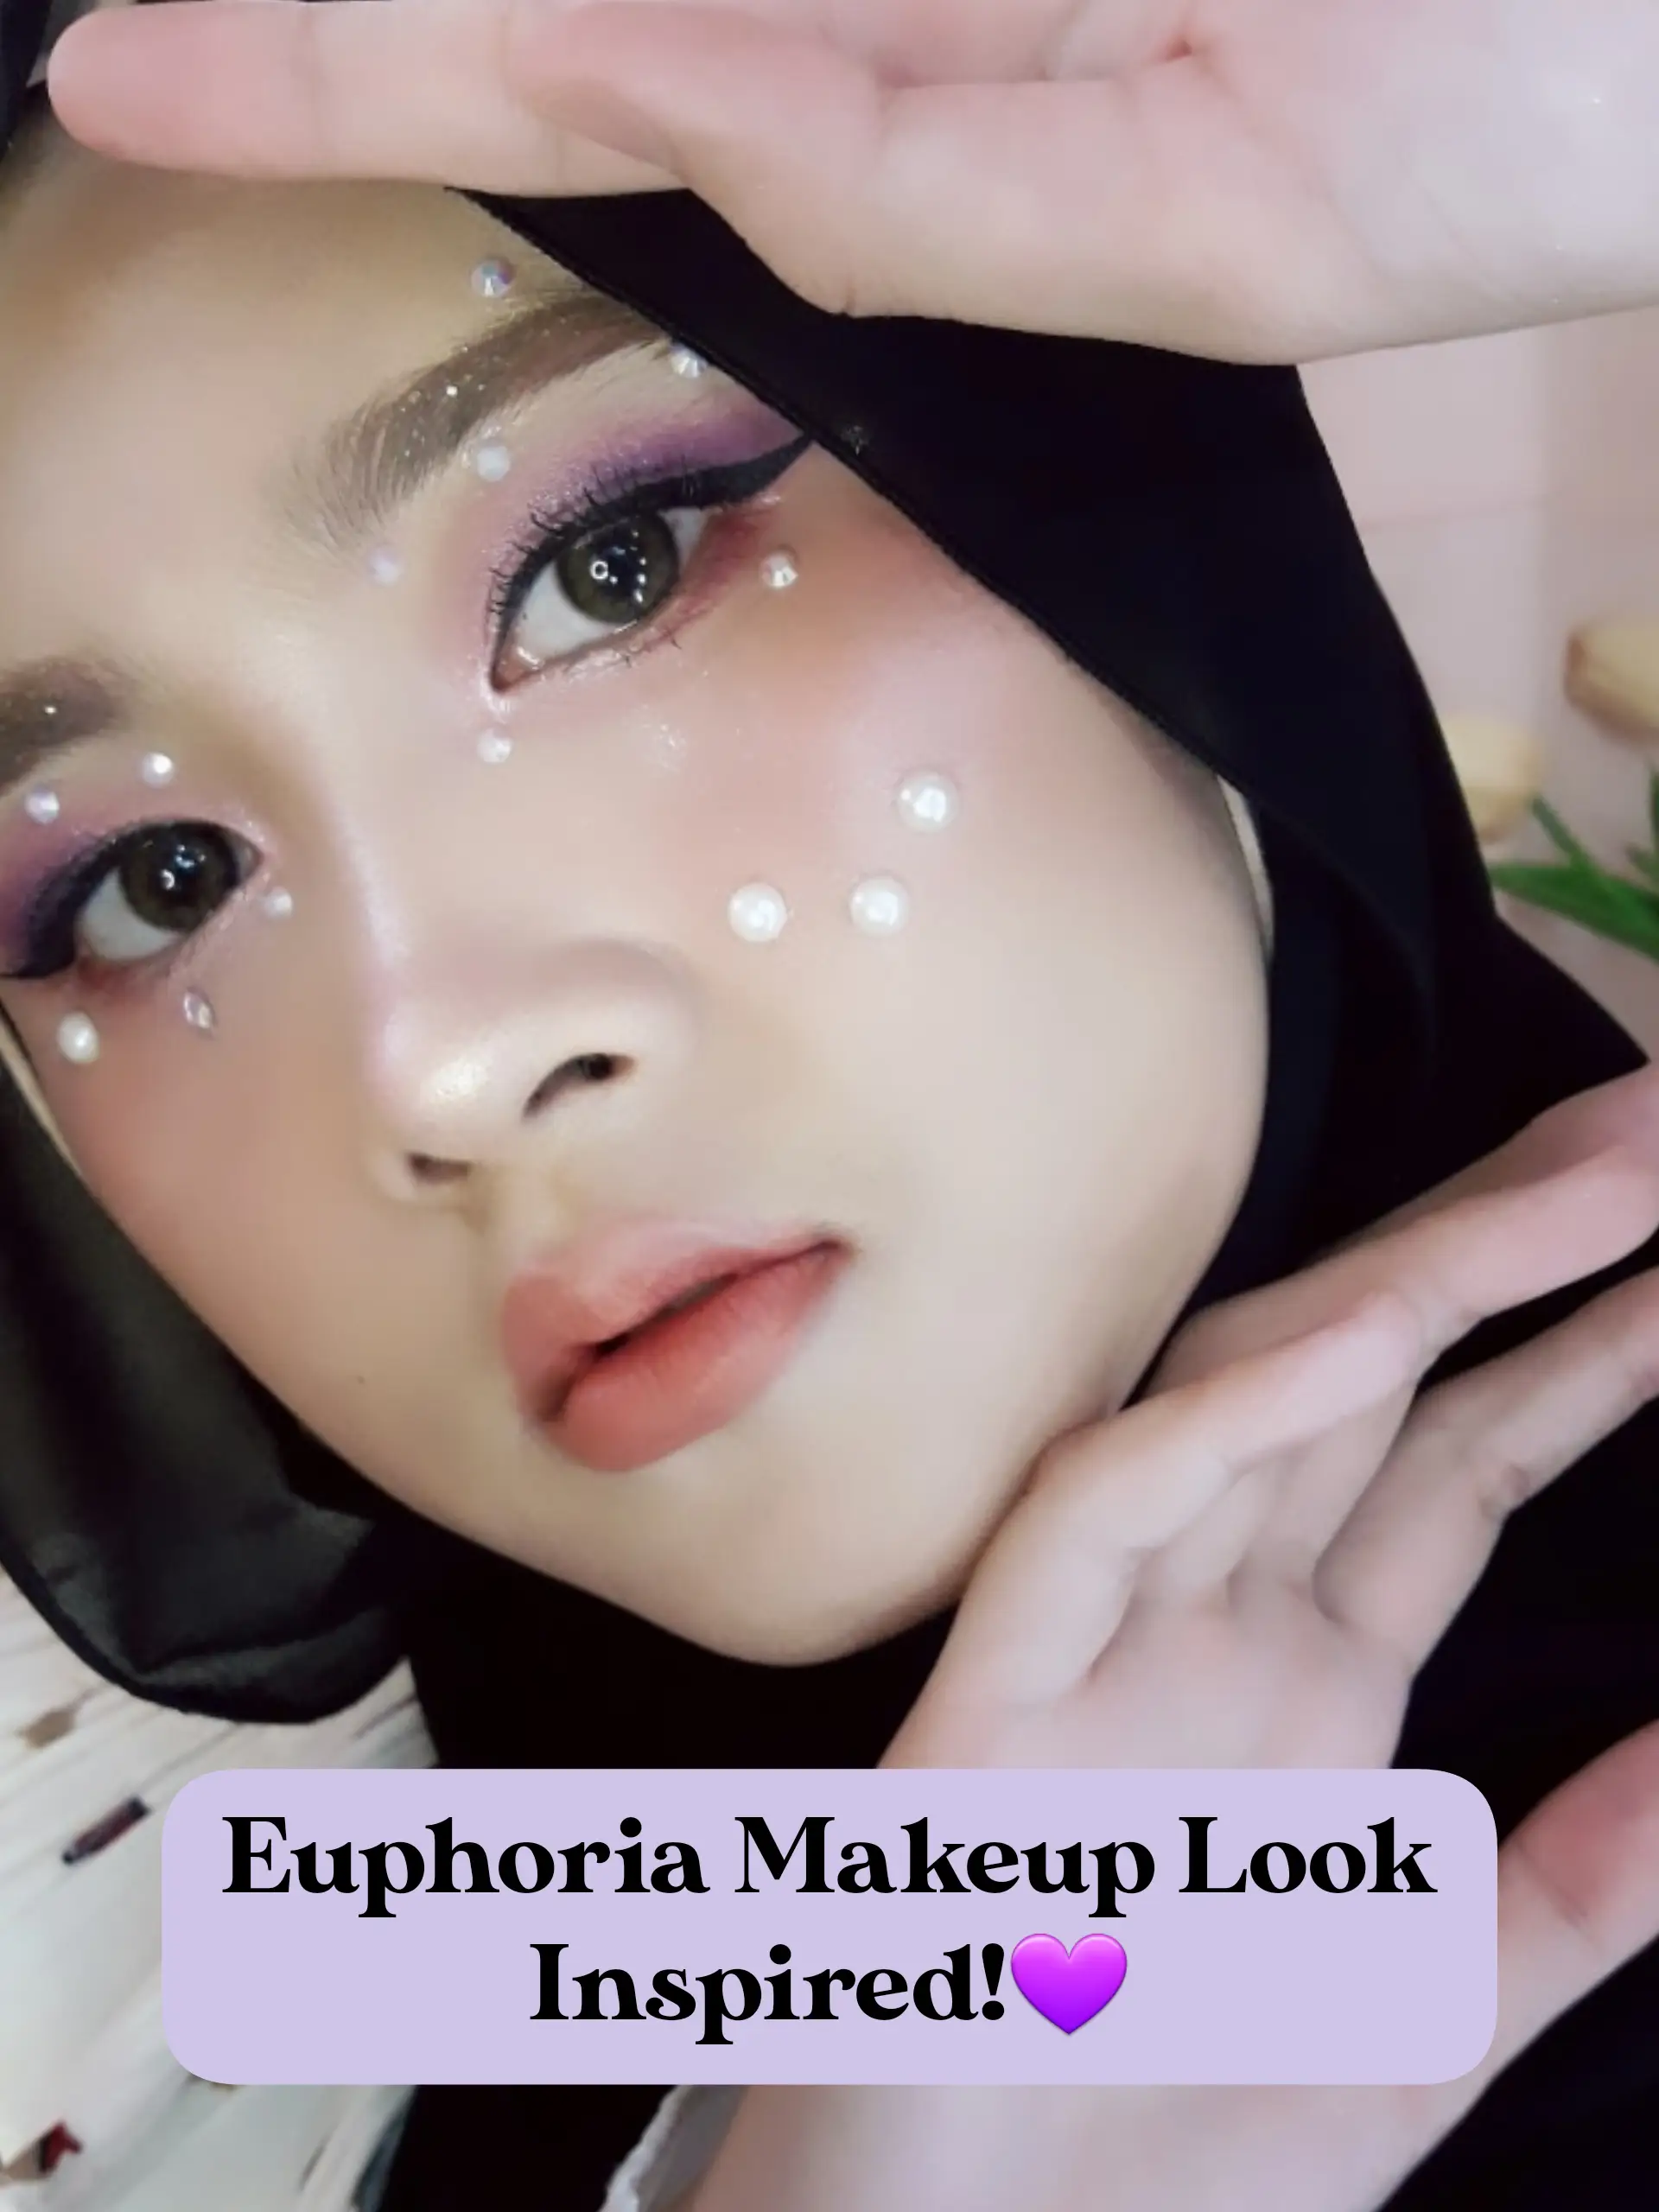 Another Euphoria look I did!! inspired by Maddy's makeup!! : r/euphoria